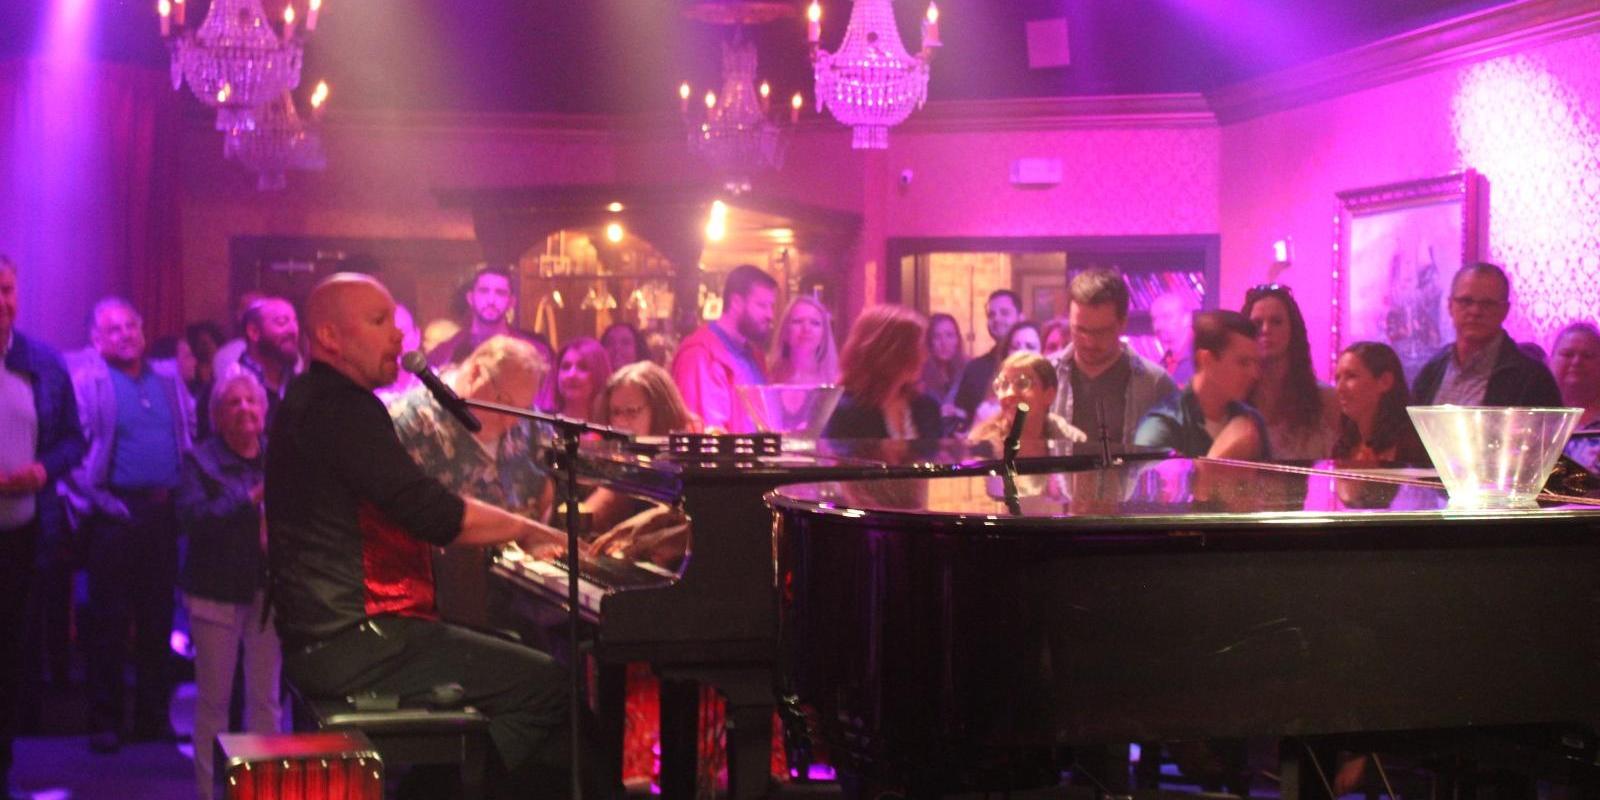 Dueling Pianos @ Jewel promotional image